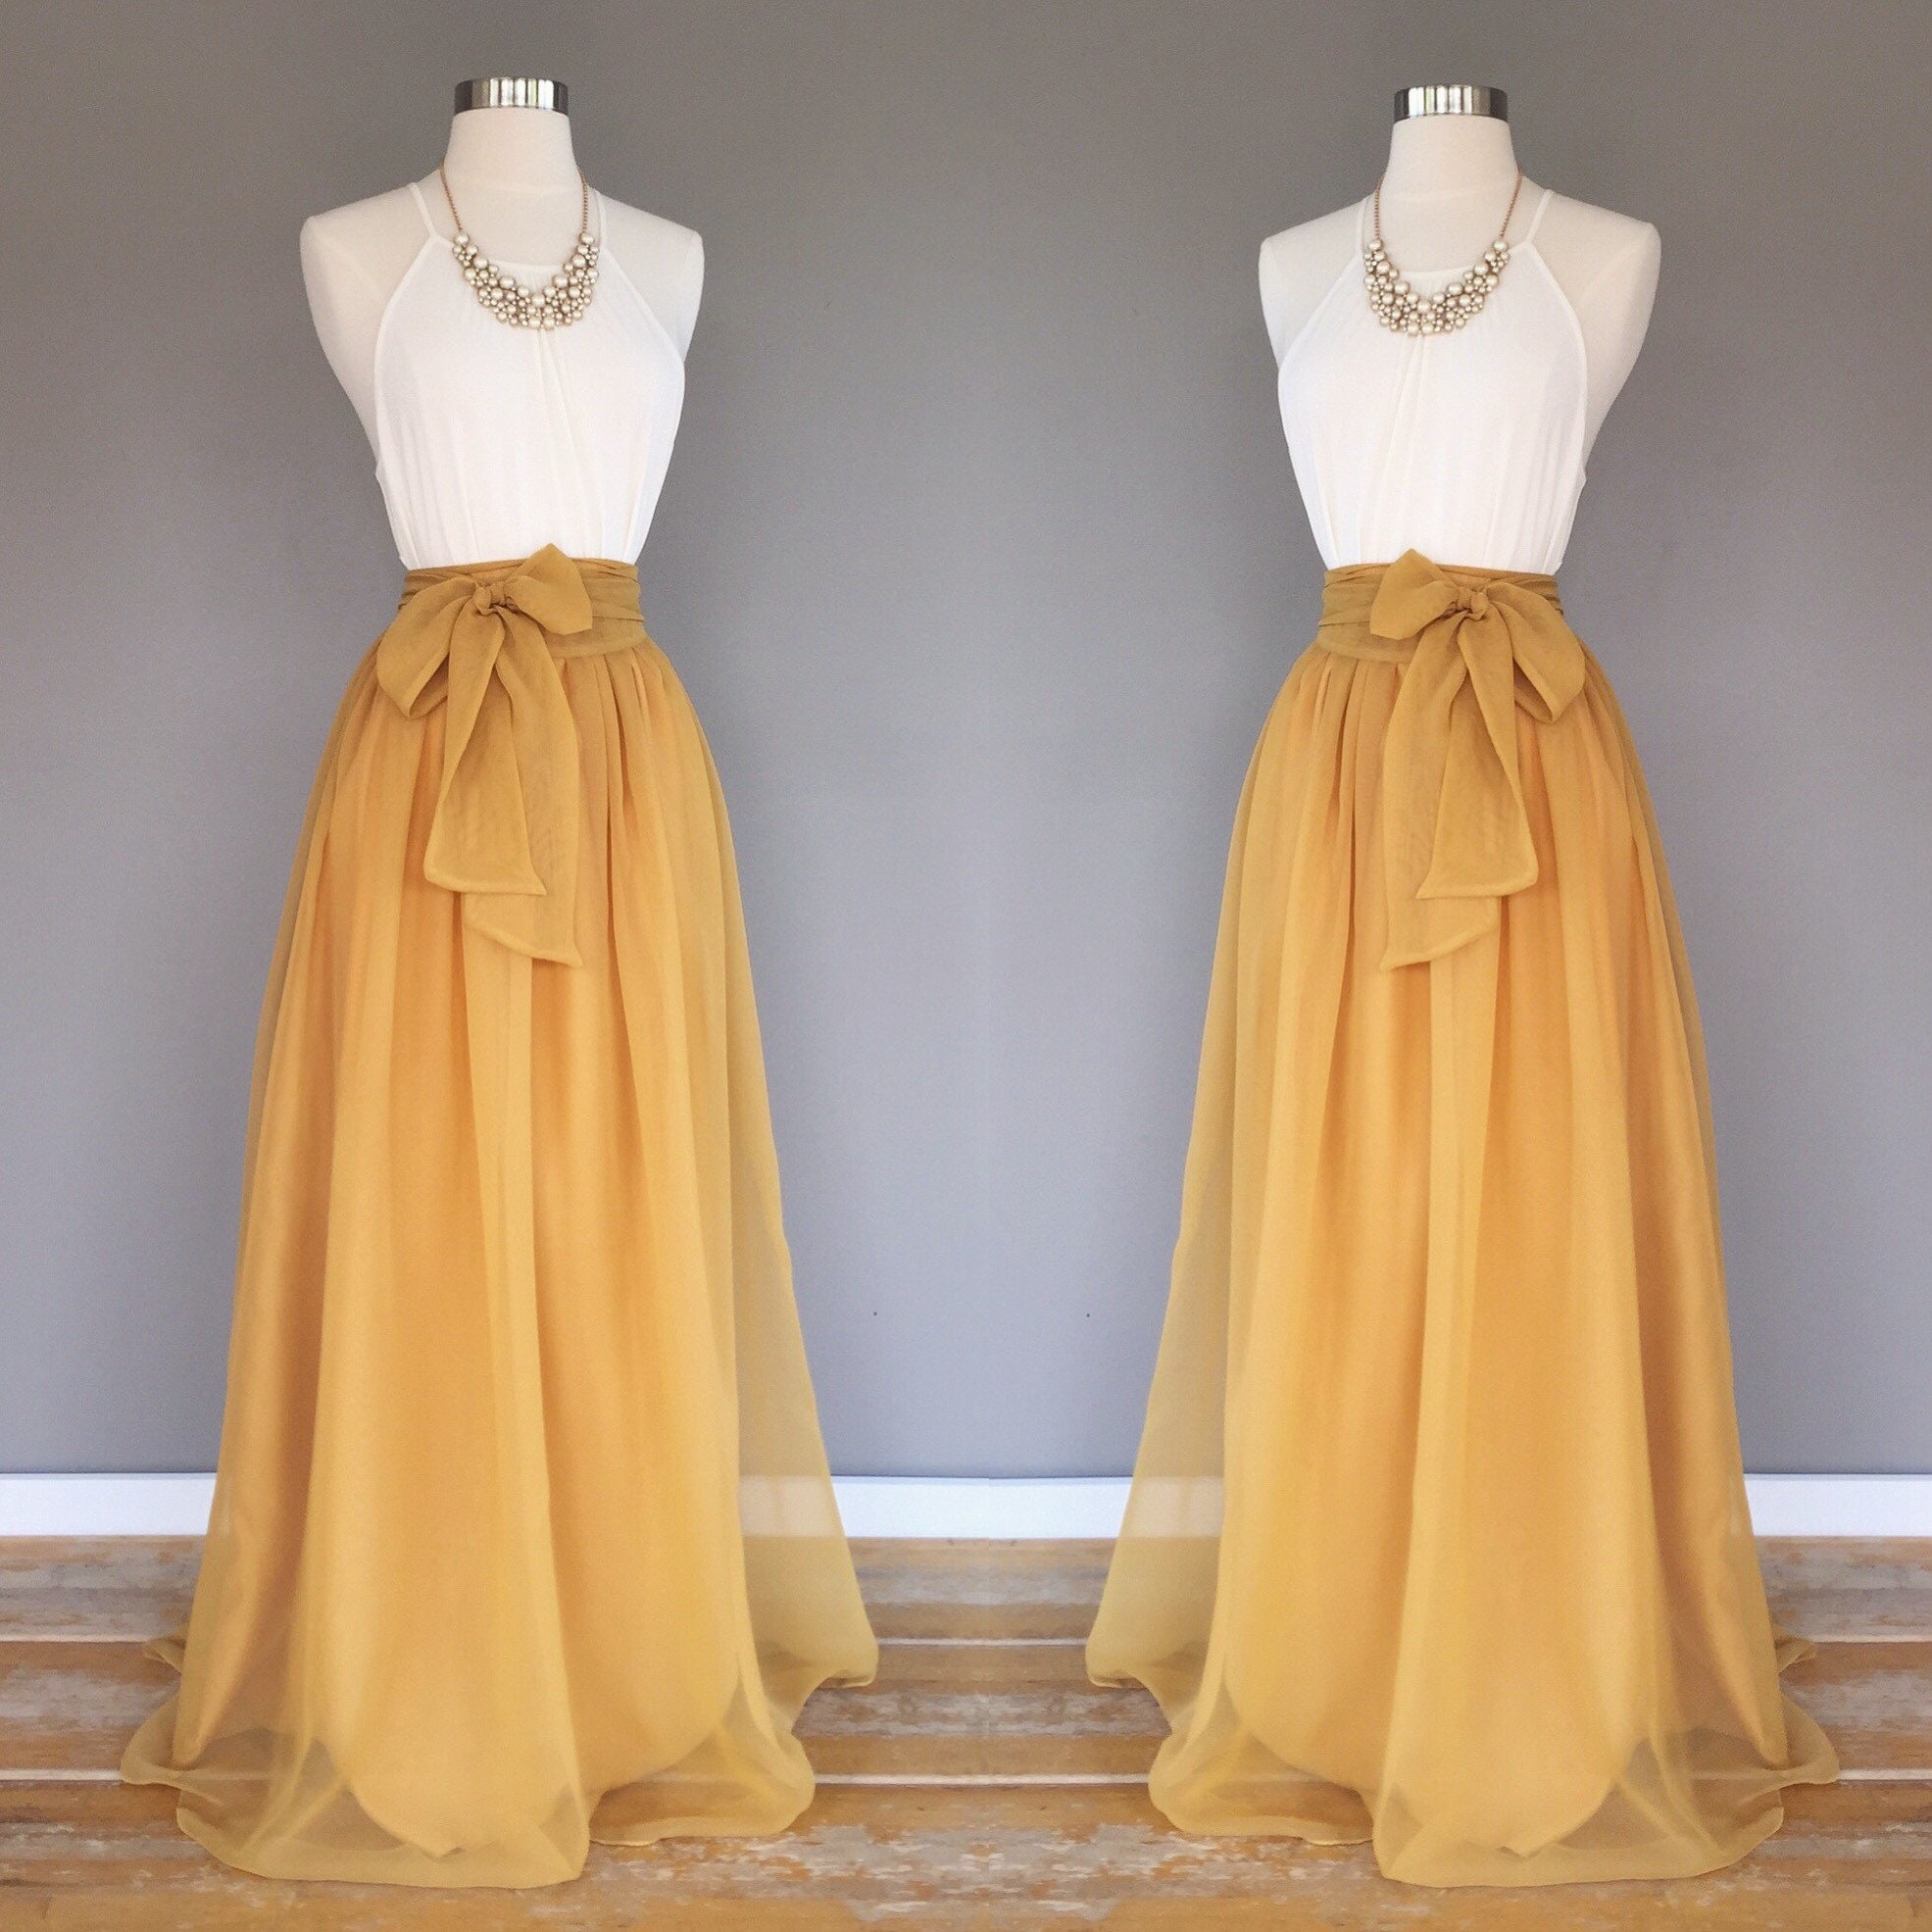 ANTIQUE GOLD Chiffon Skirt Any Length and Color Bridesmaid - Etsy Canada